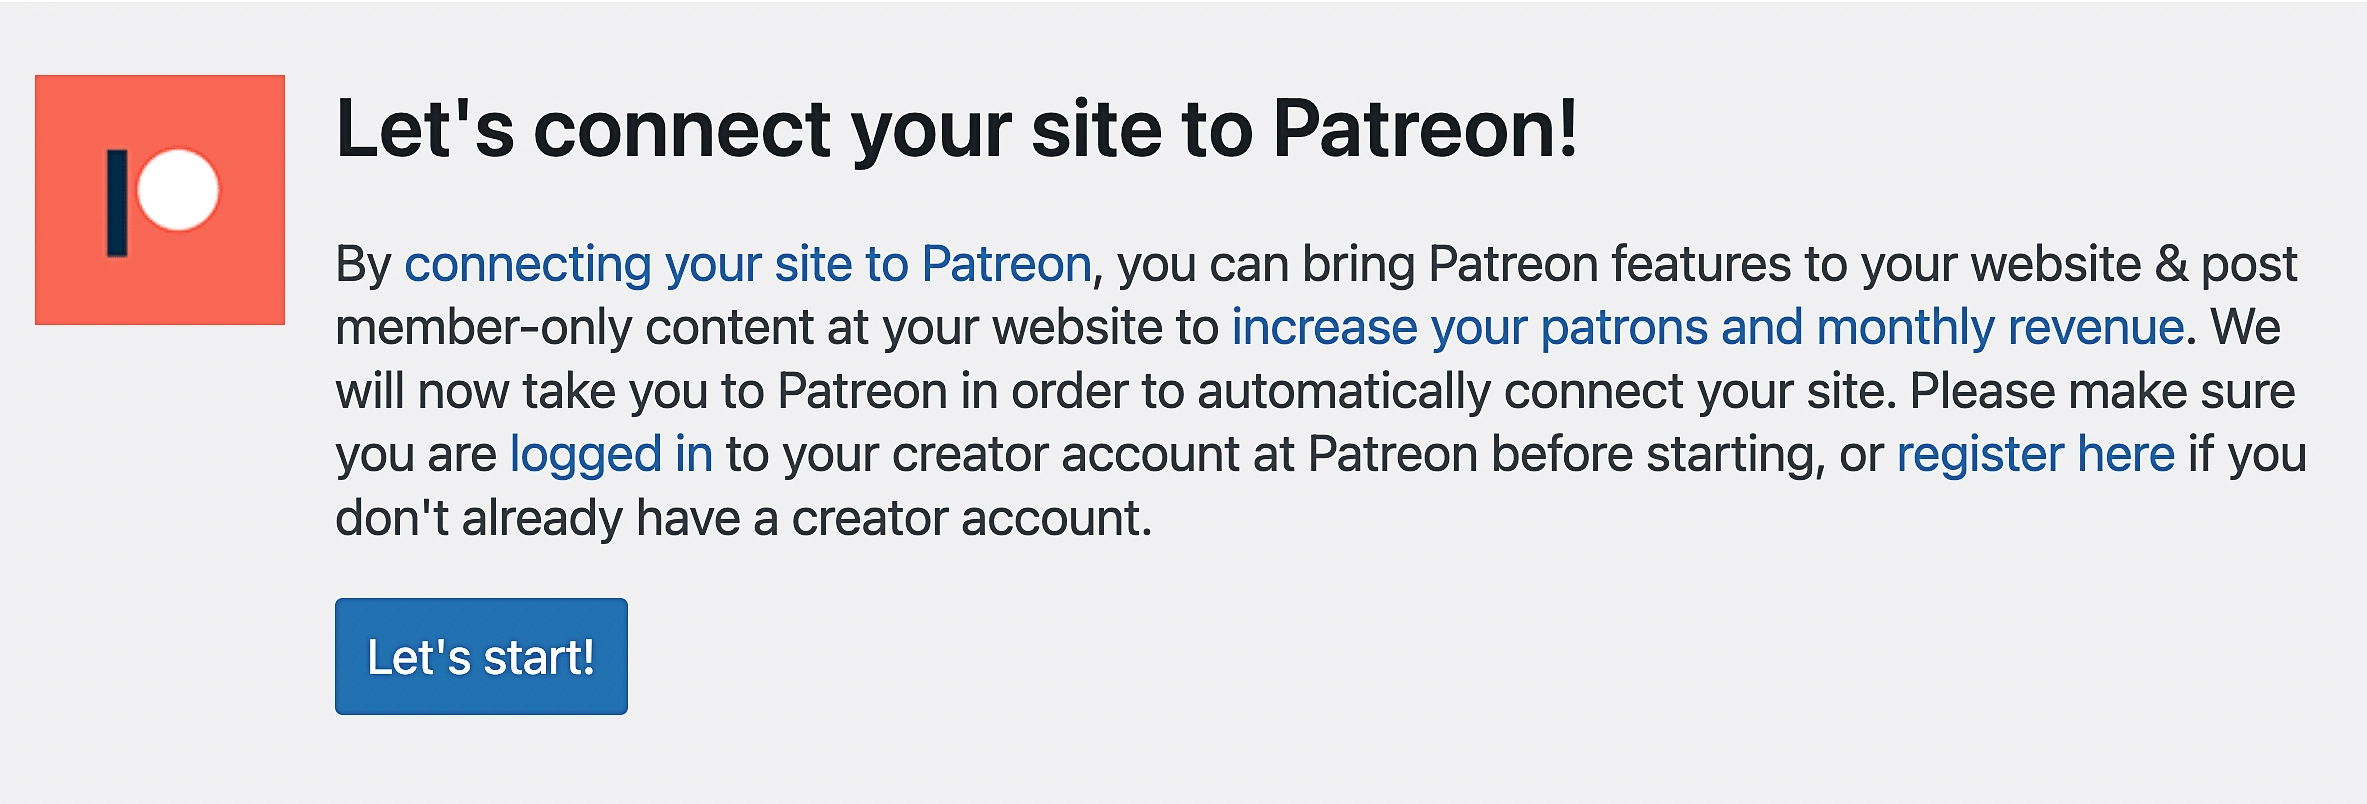 Restrict content in WordPress by connecting your site to Patreon.